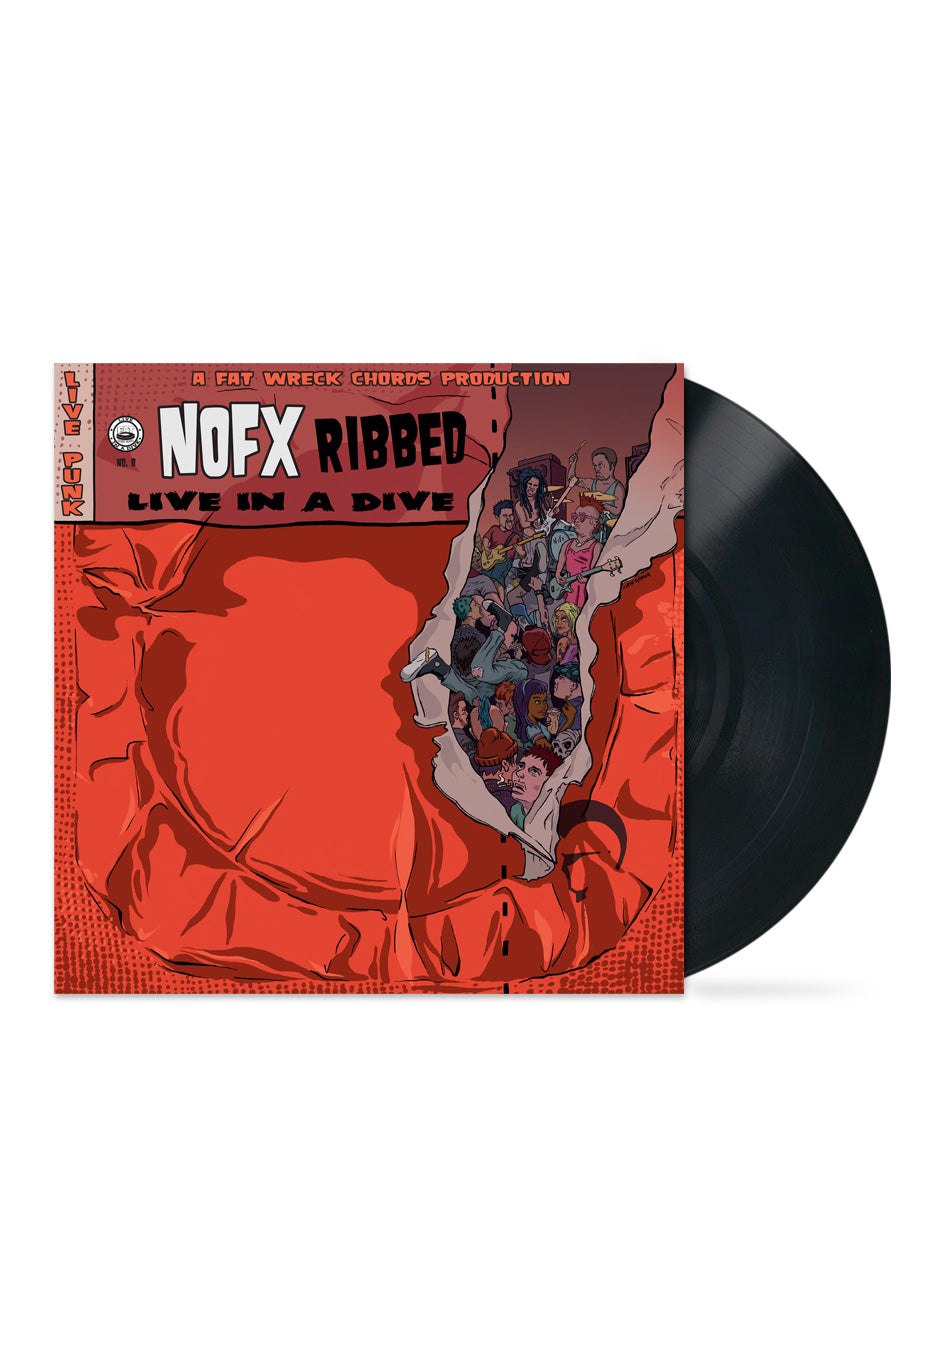 NOFX - Ribbed - Live In A Dive - Vinyl